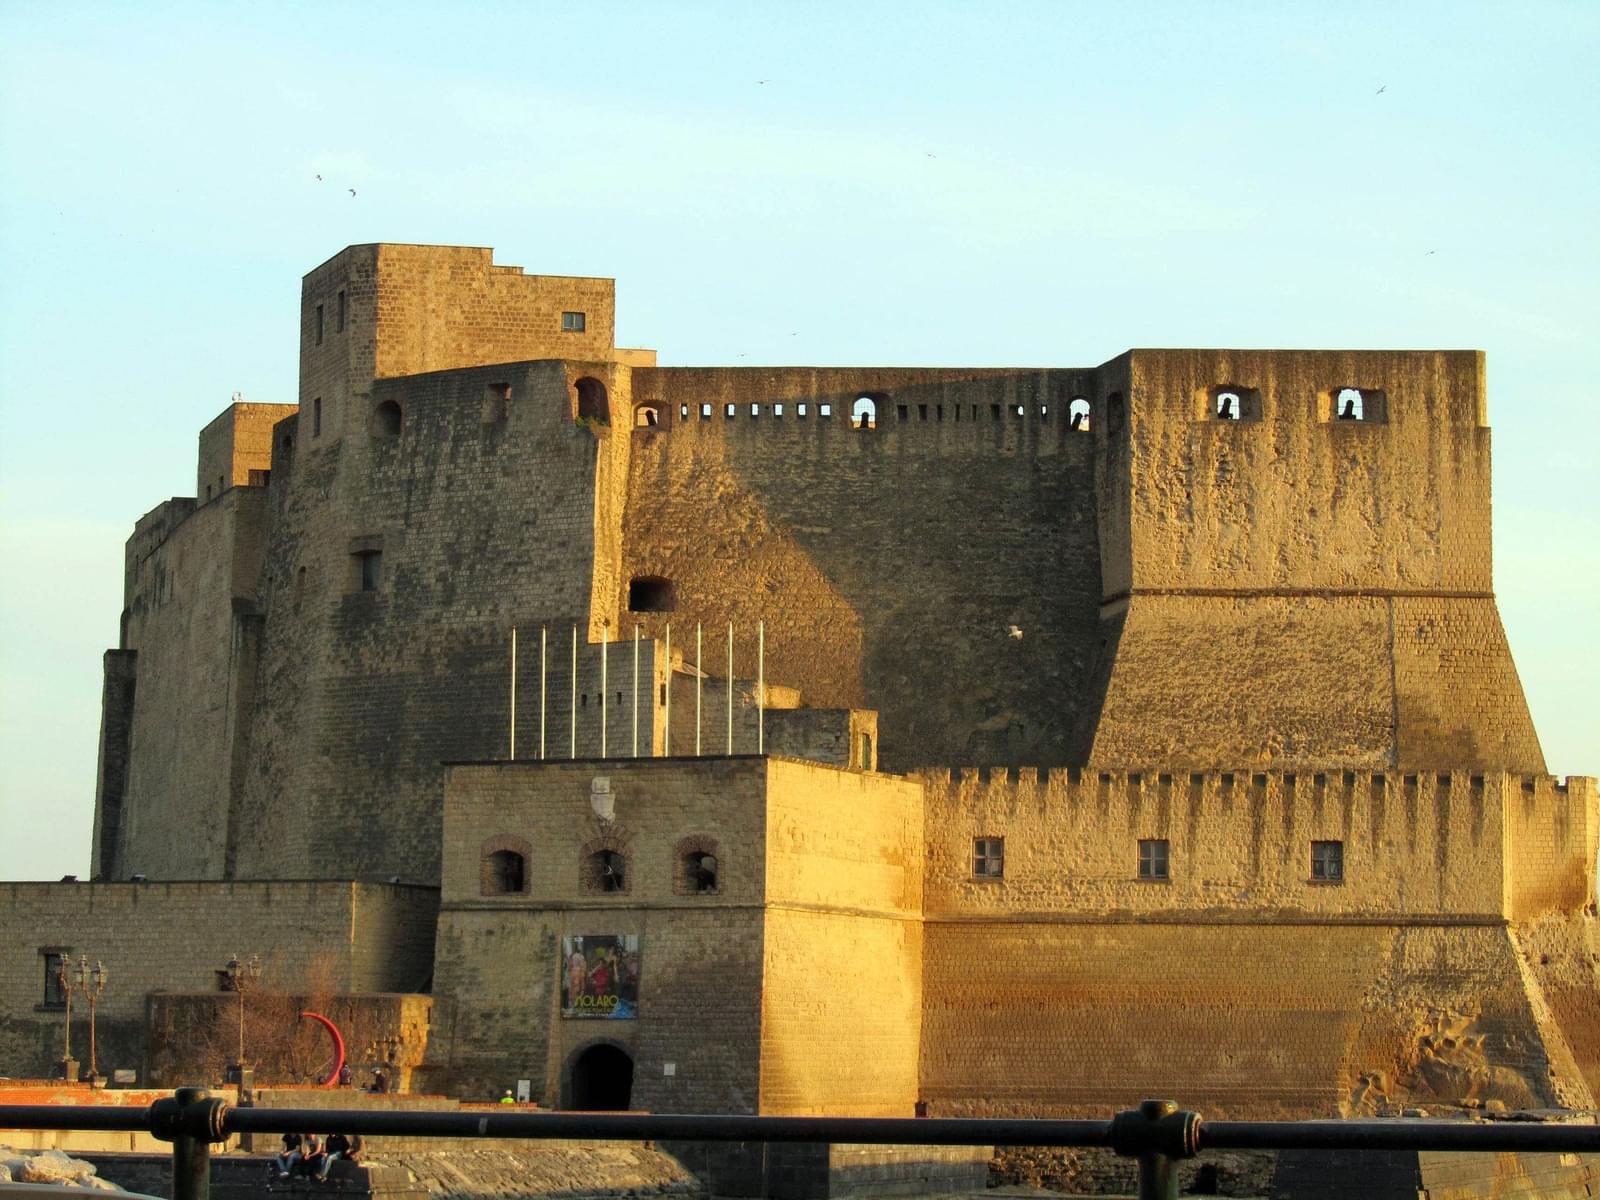 The External part of the Castel dell’Ovo